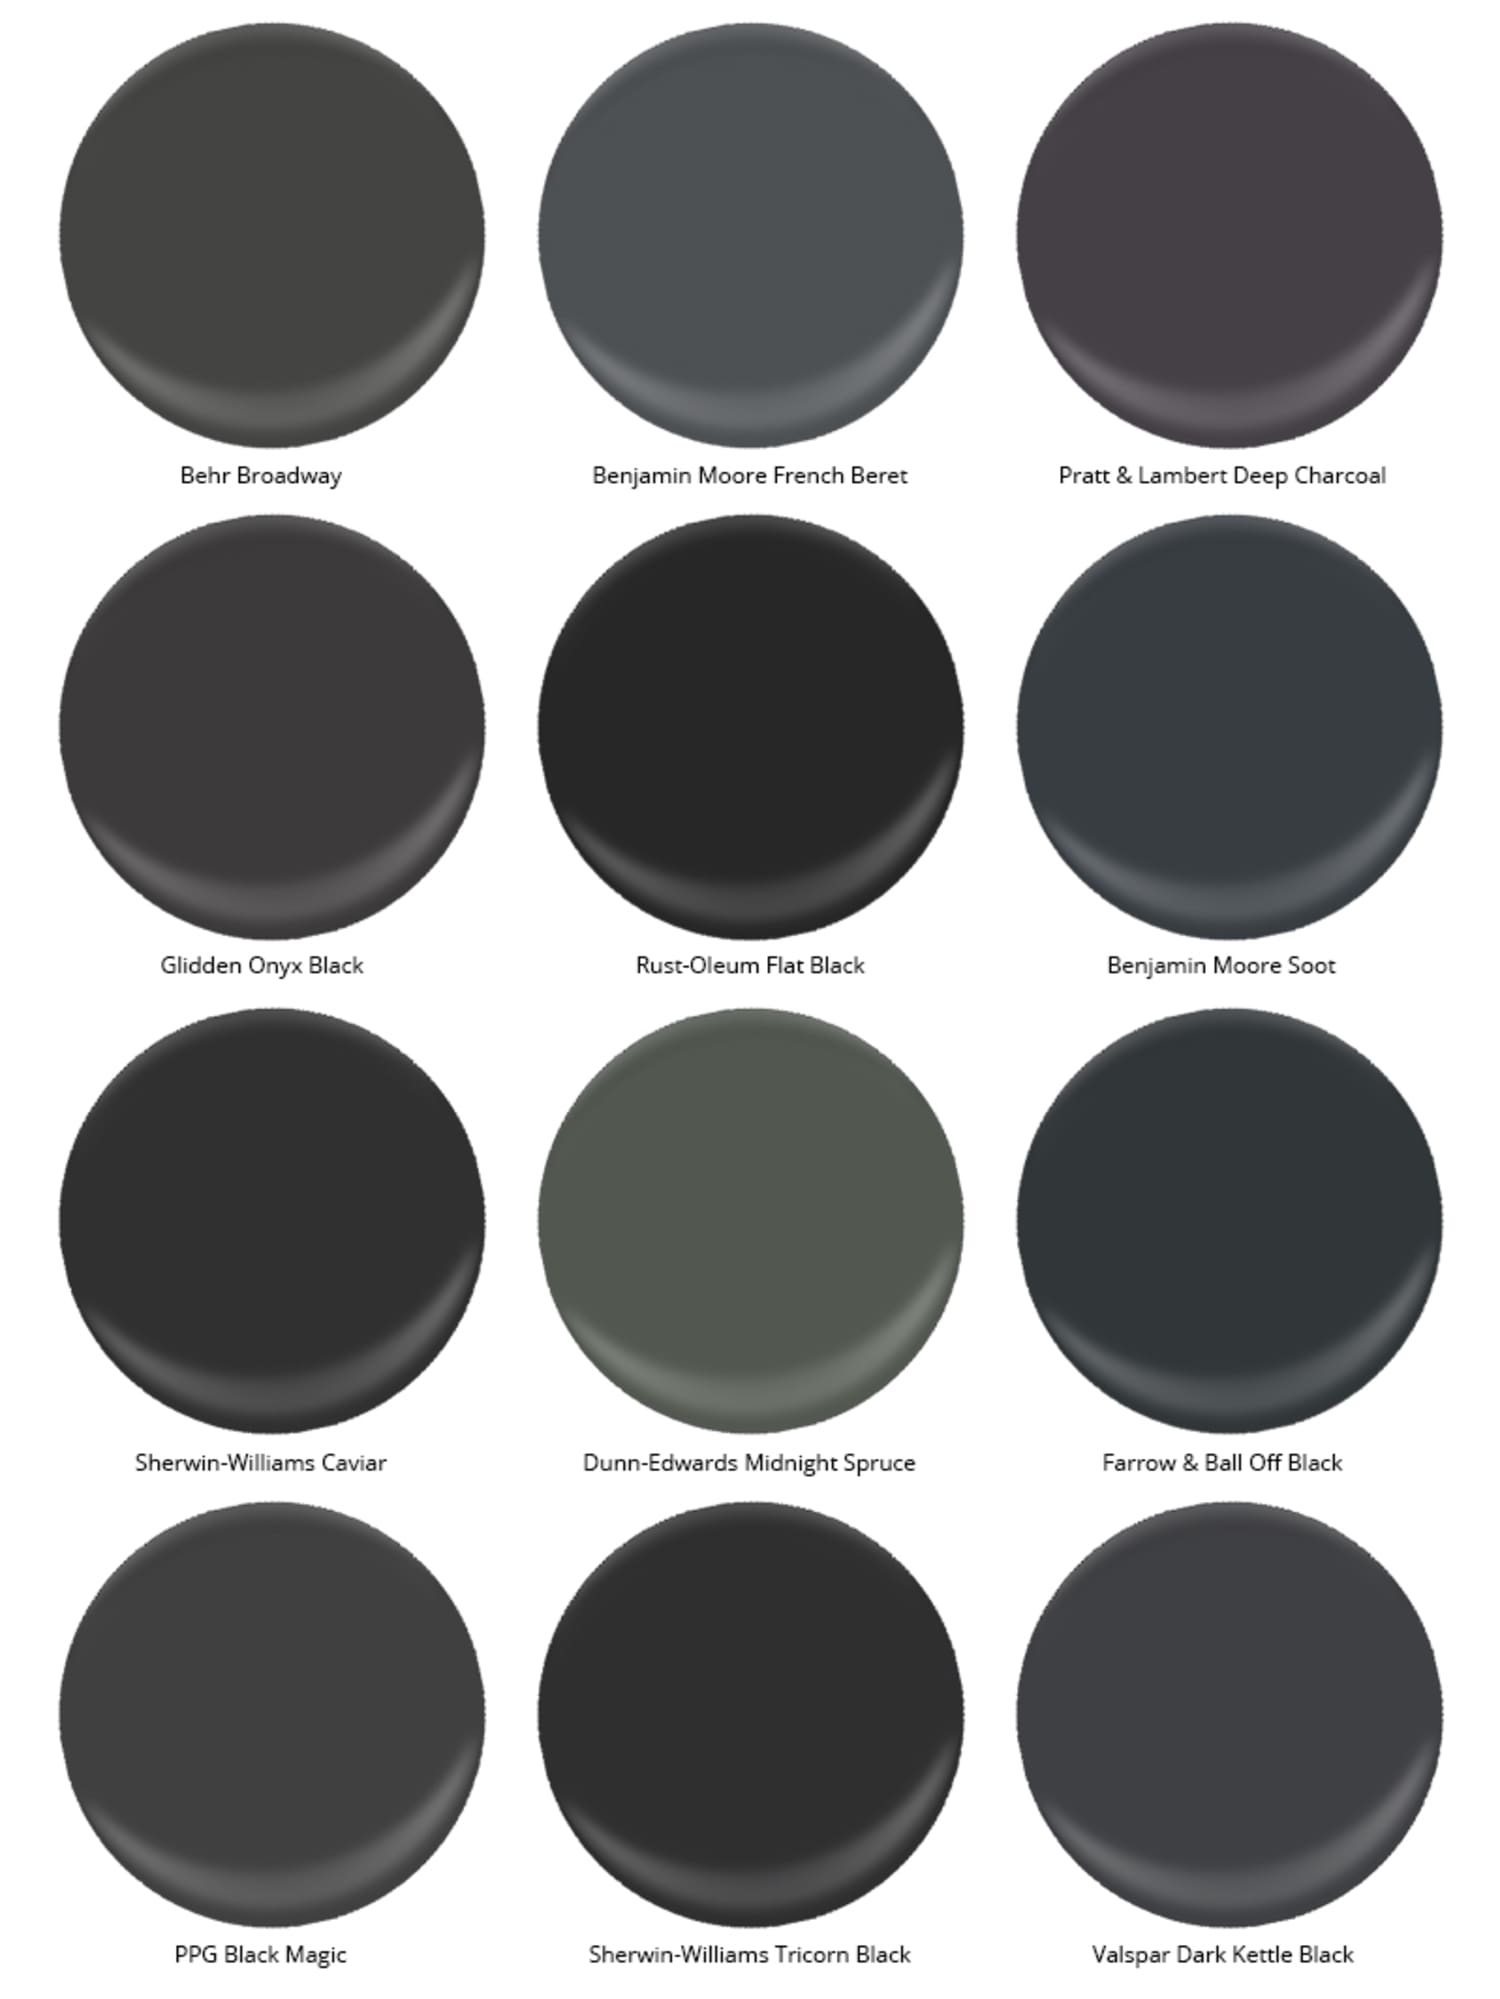 Trade Secrets The Best Black Paint Colors for Any Room